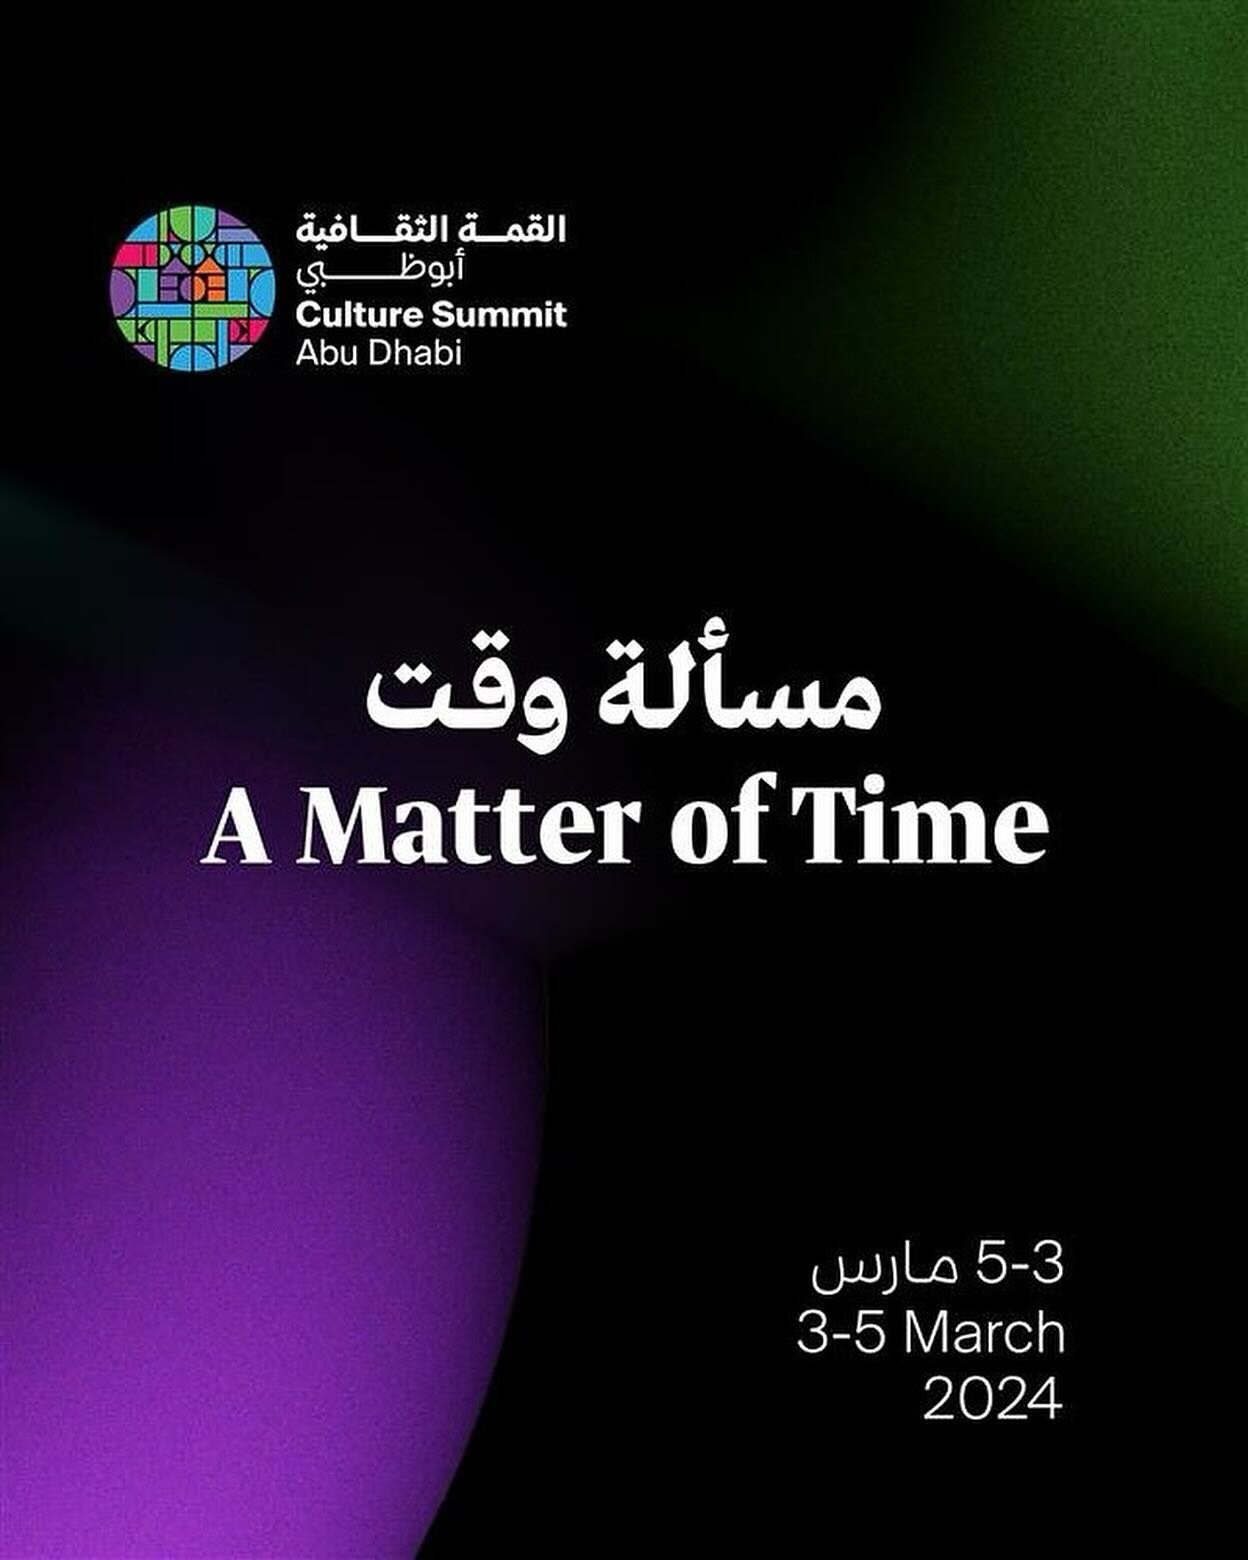 Culture Connect was once again delighted to work with the Department of Culture and Tourism Abu Dhabi on the sixth edition of the Culture Summit Abu Dhabi from 3-5 March 2024, bringing together partners of the Culture Summit to curate the programme a